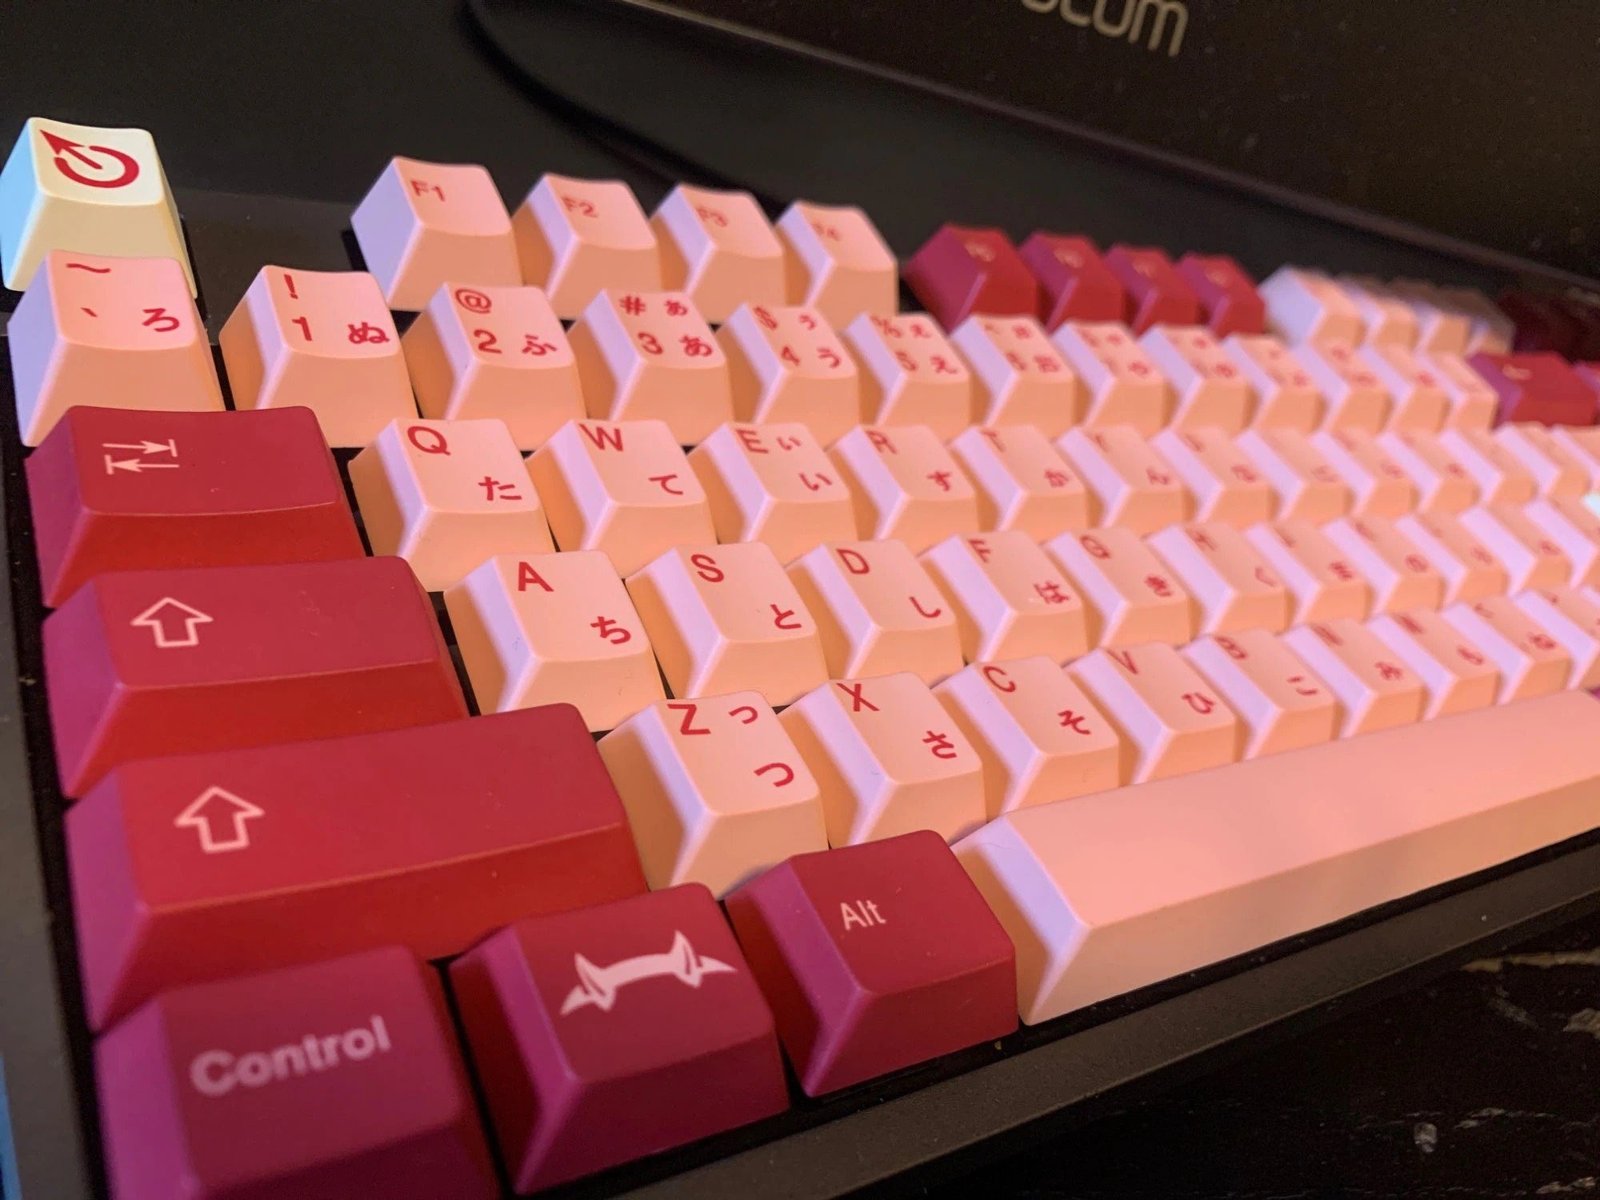 OFFICIAL Darling In The Franxx Keyboards【Exclusive on Anime